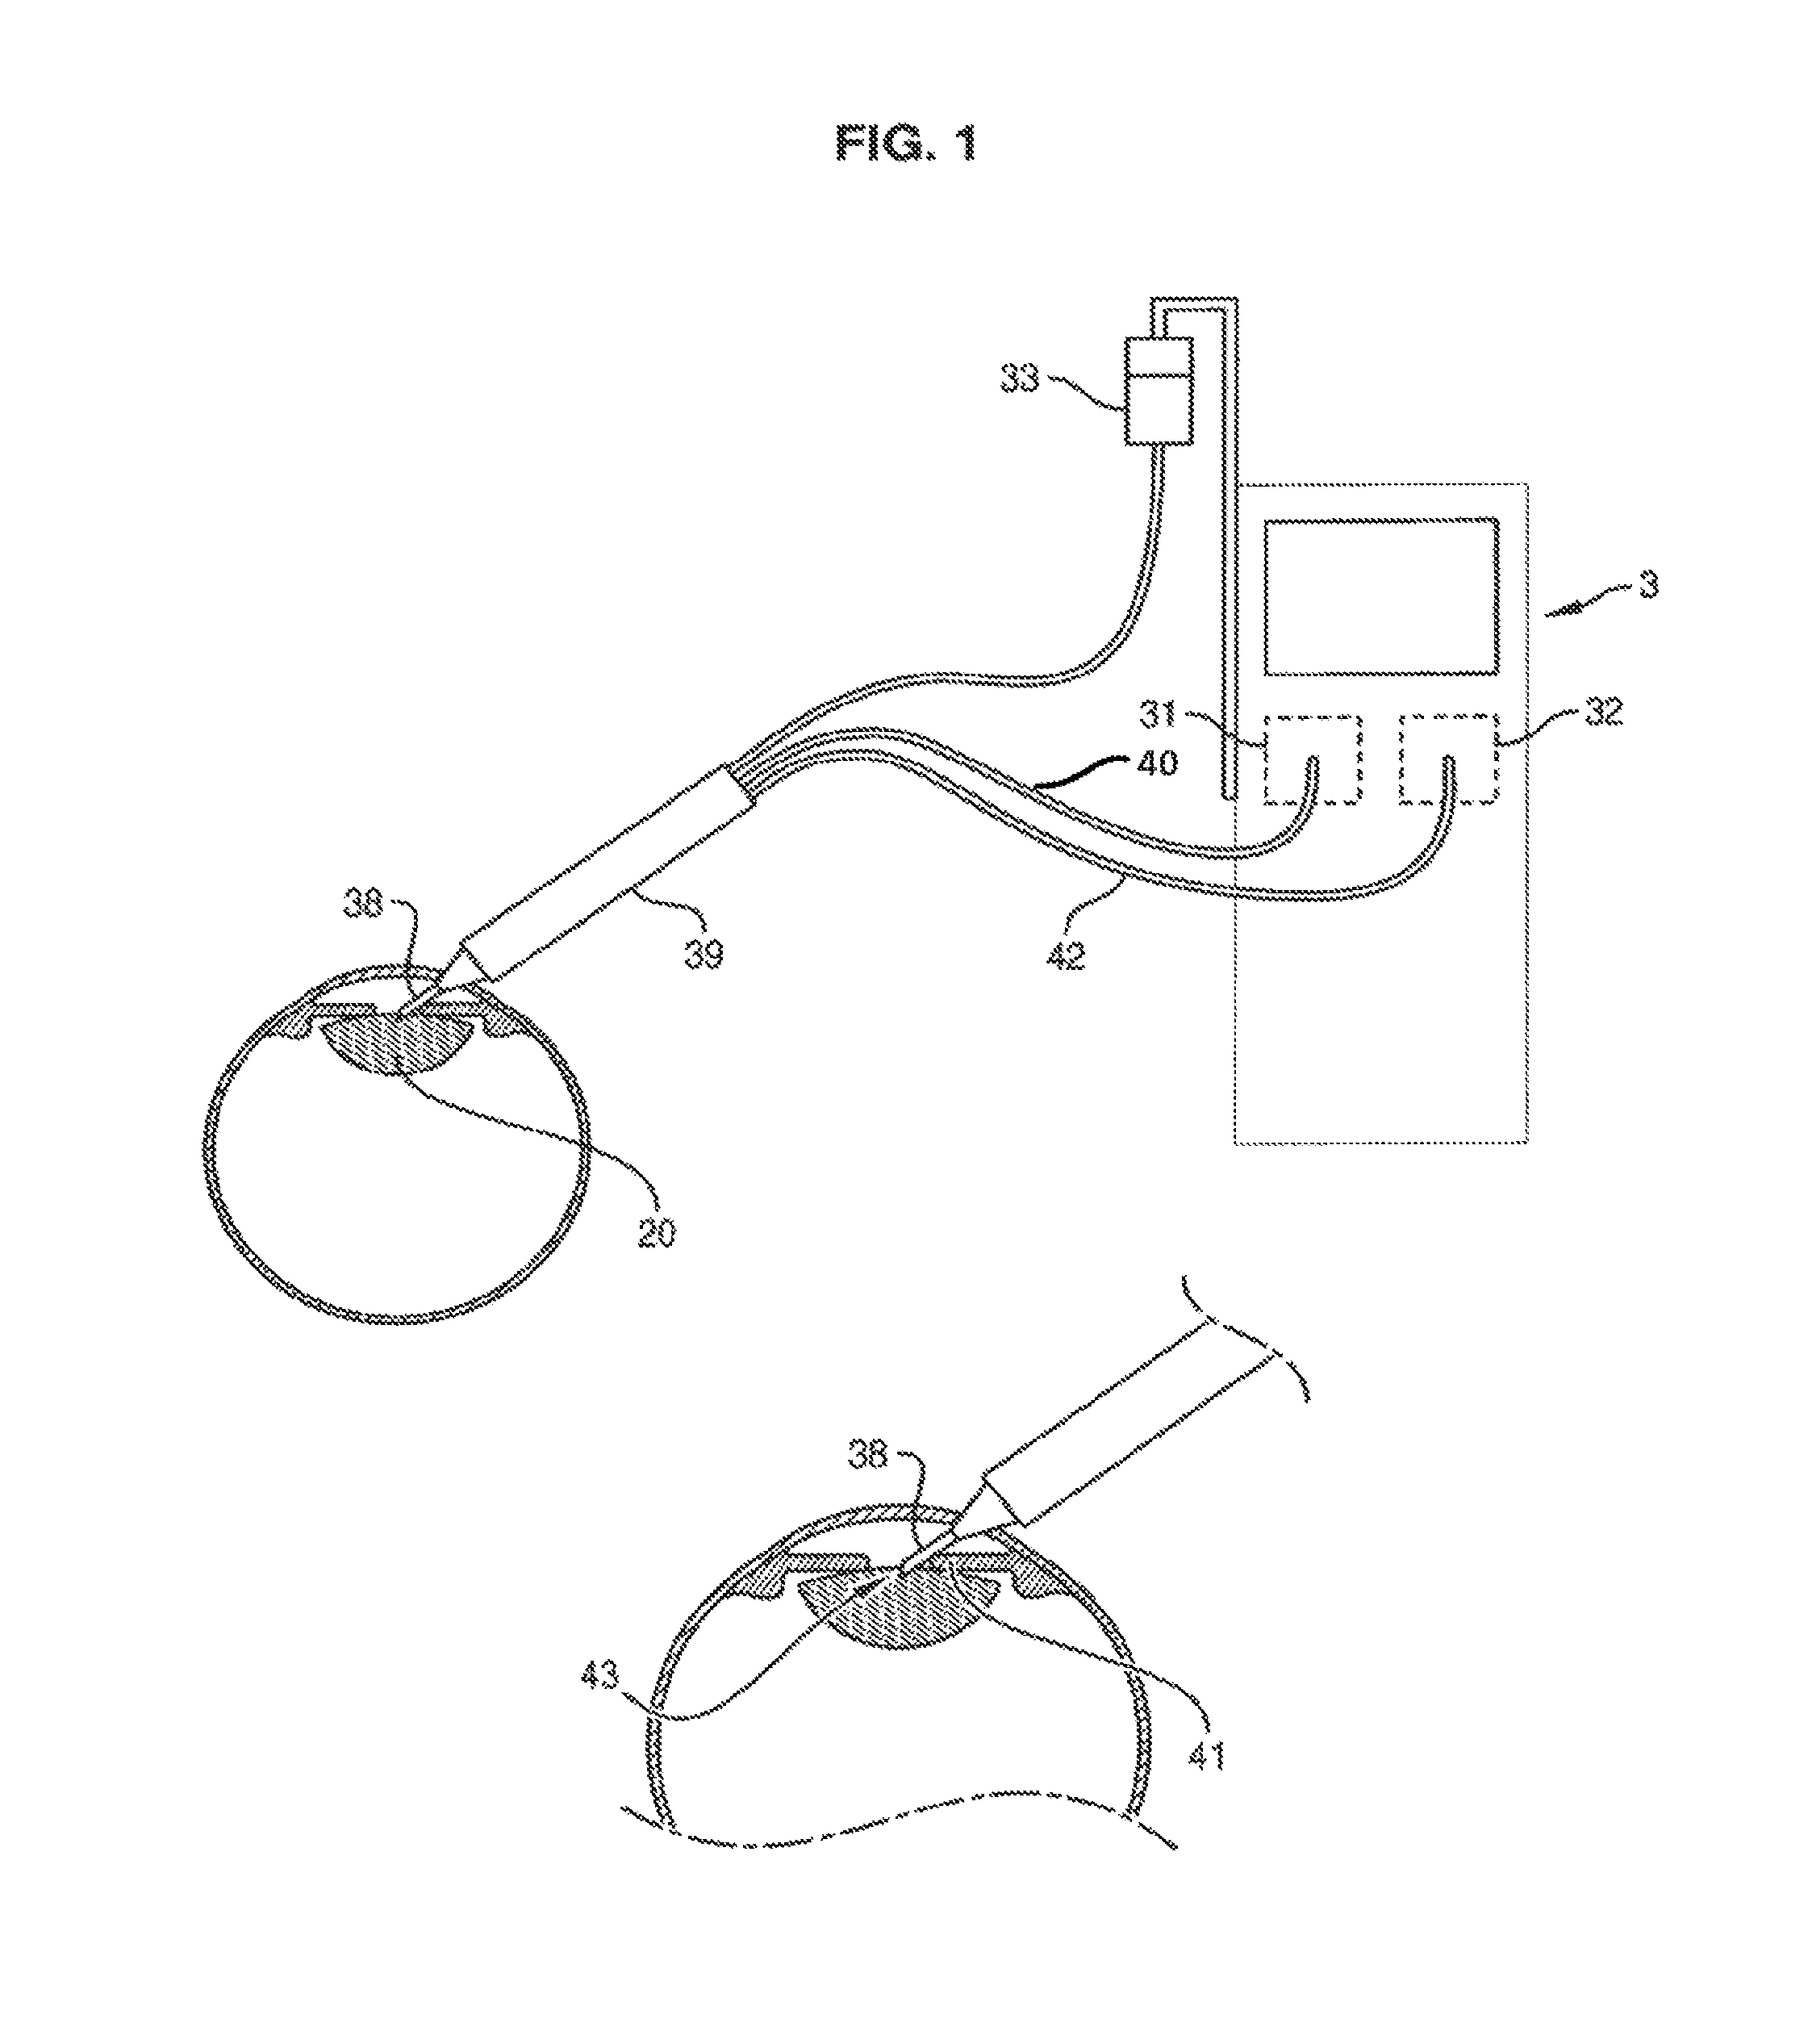 Method of treating an ocular pathology by applying ultrasound to the trabecular meshwork and device thereof